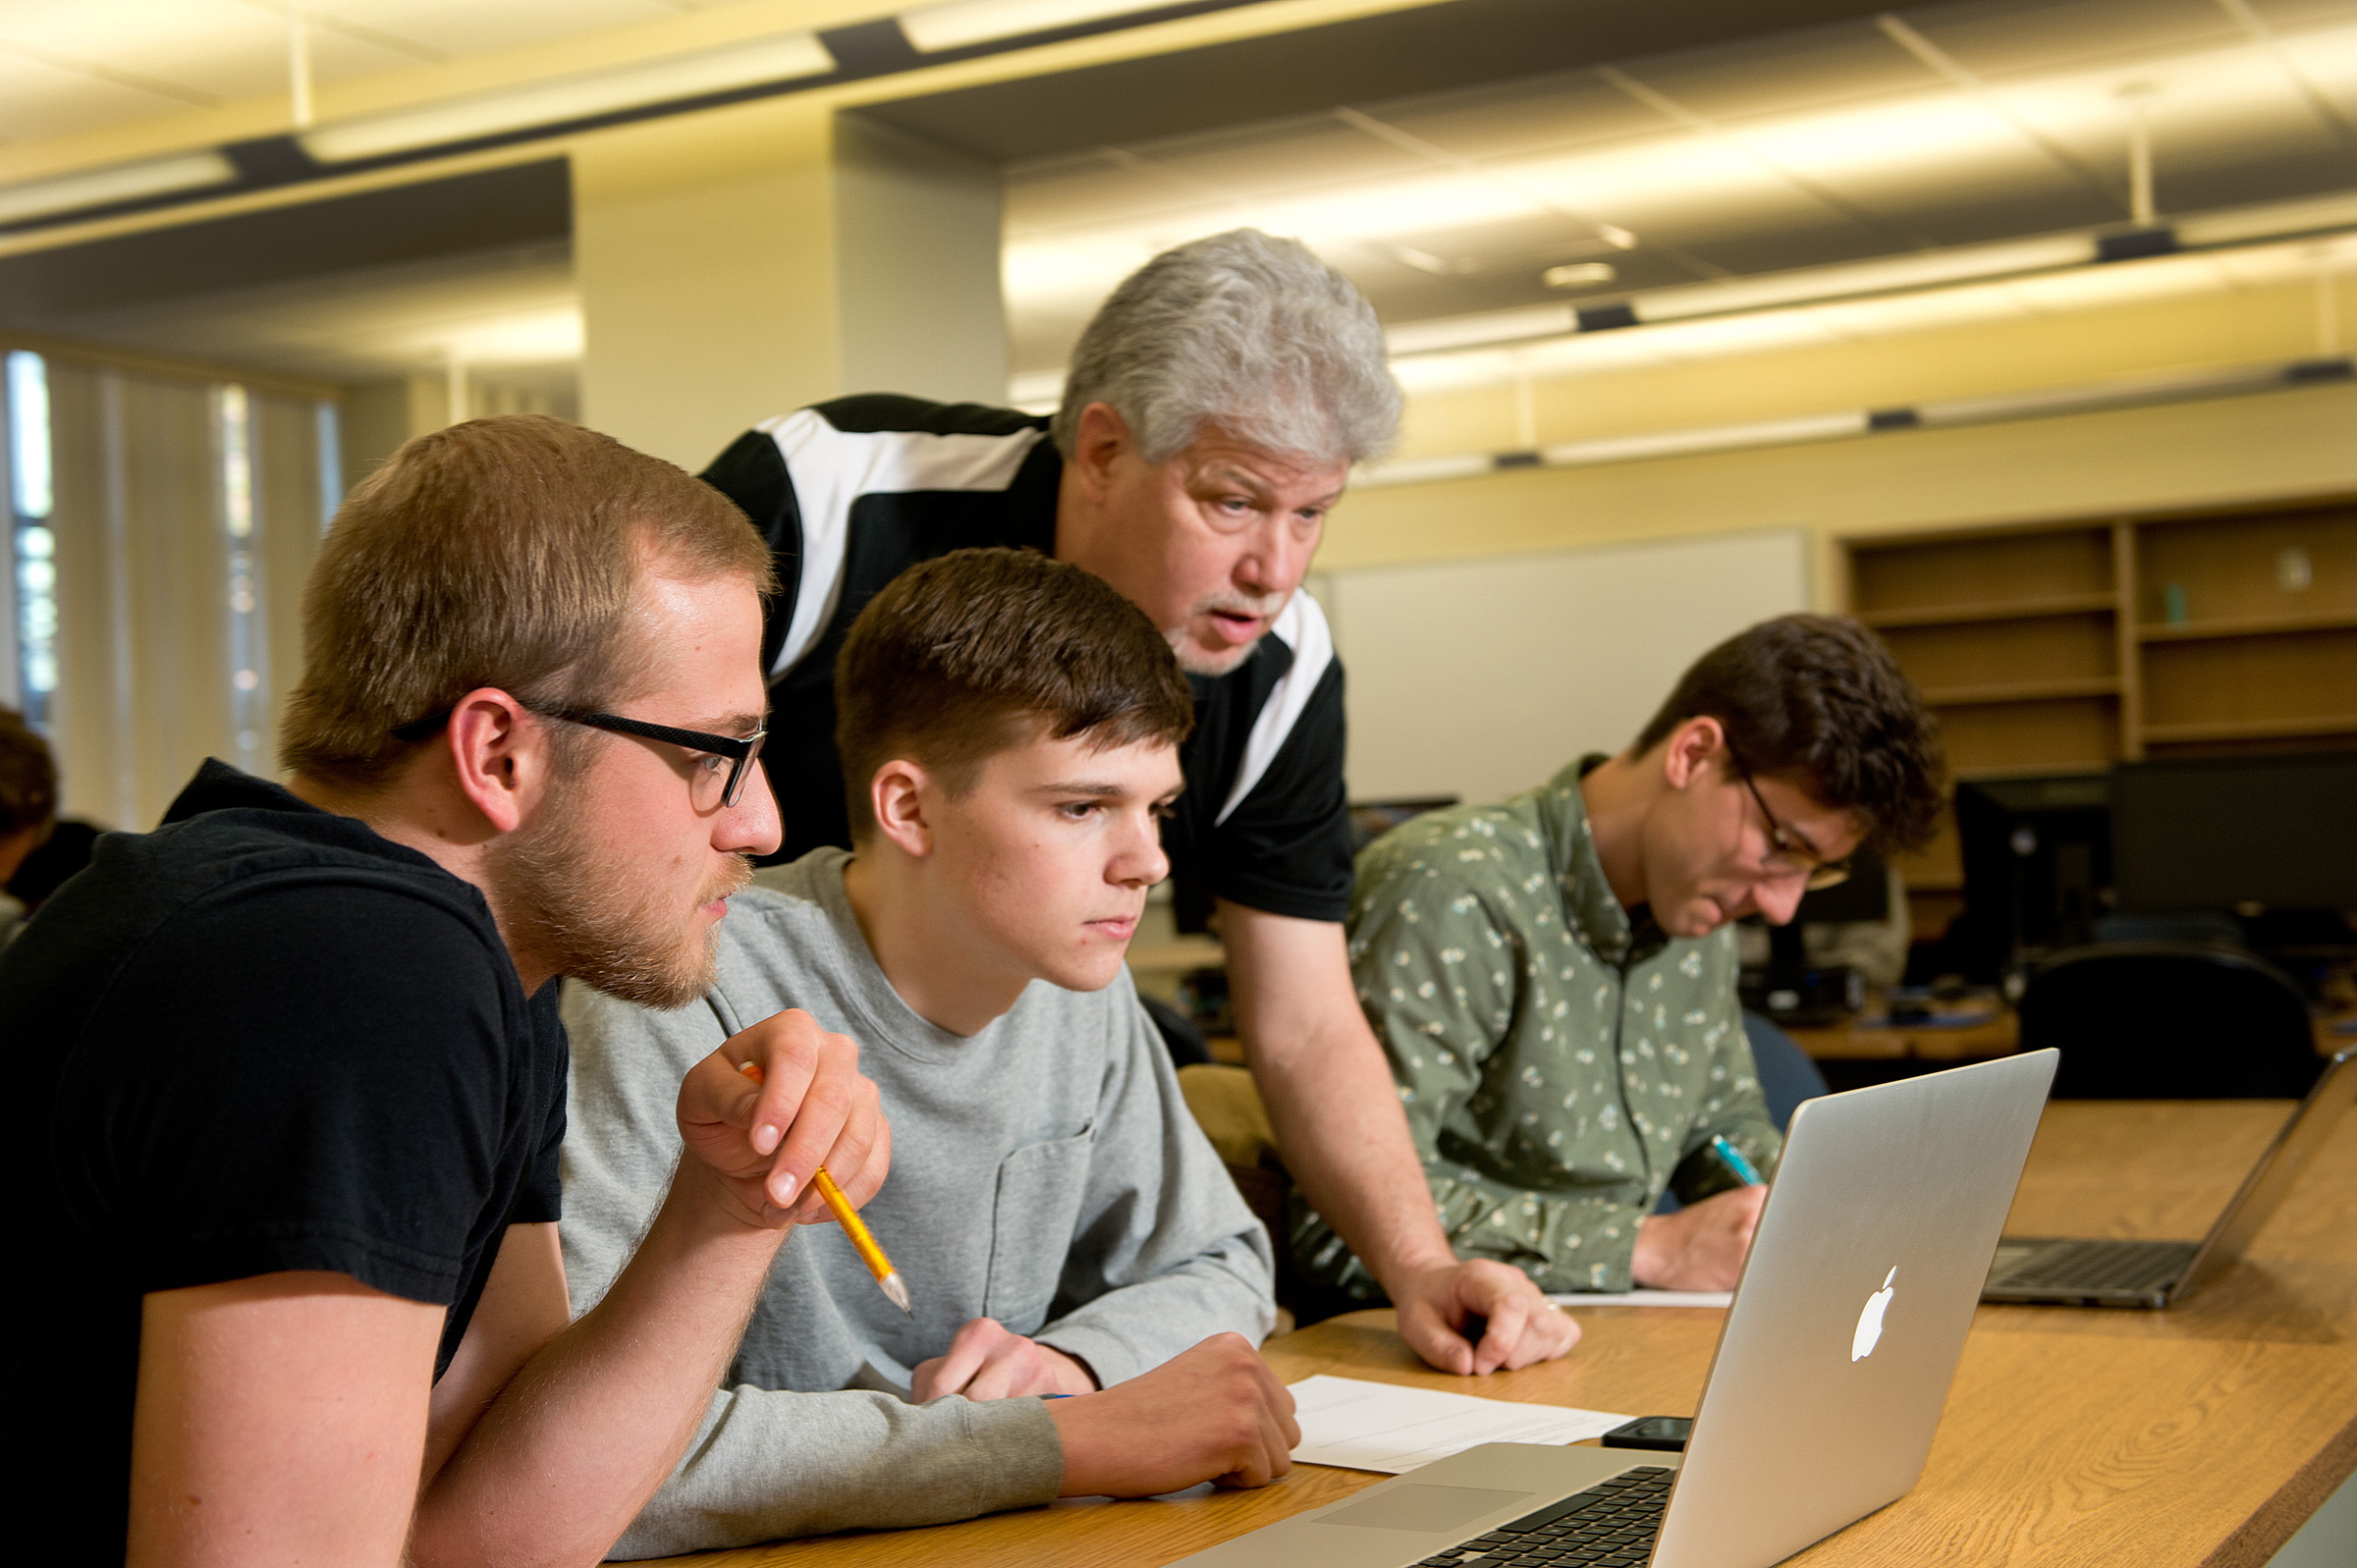 Students working on computer during class while professor is teaching